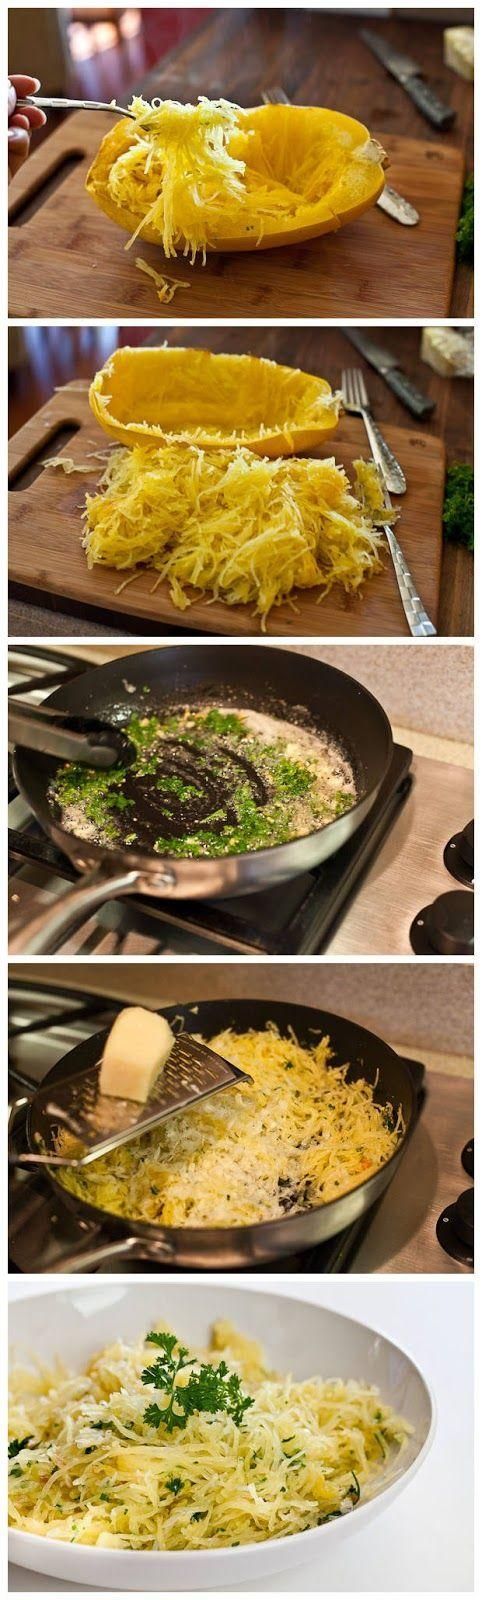 Baked Spaghetti Squash with